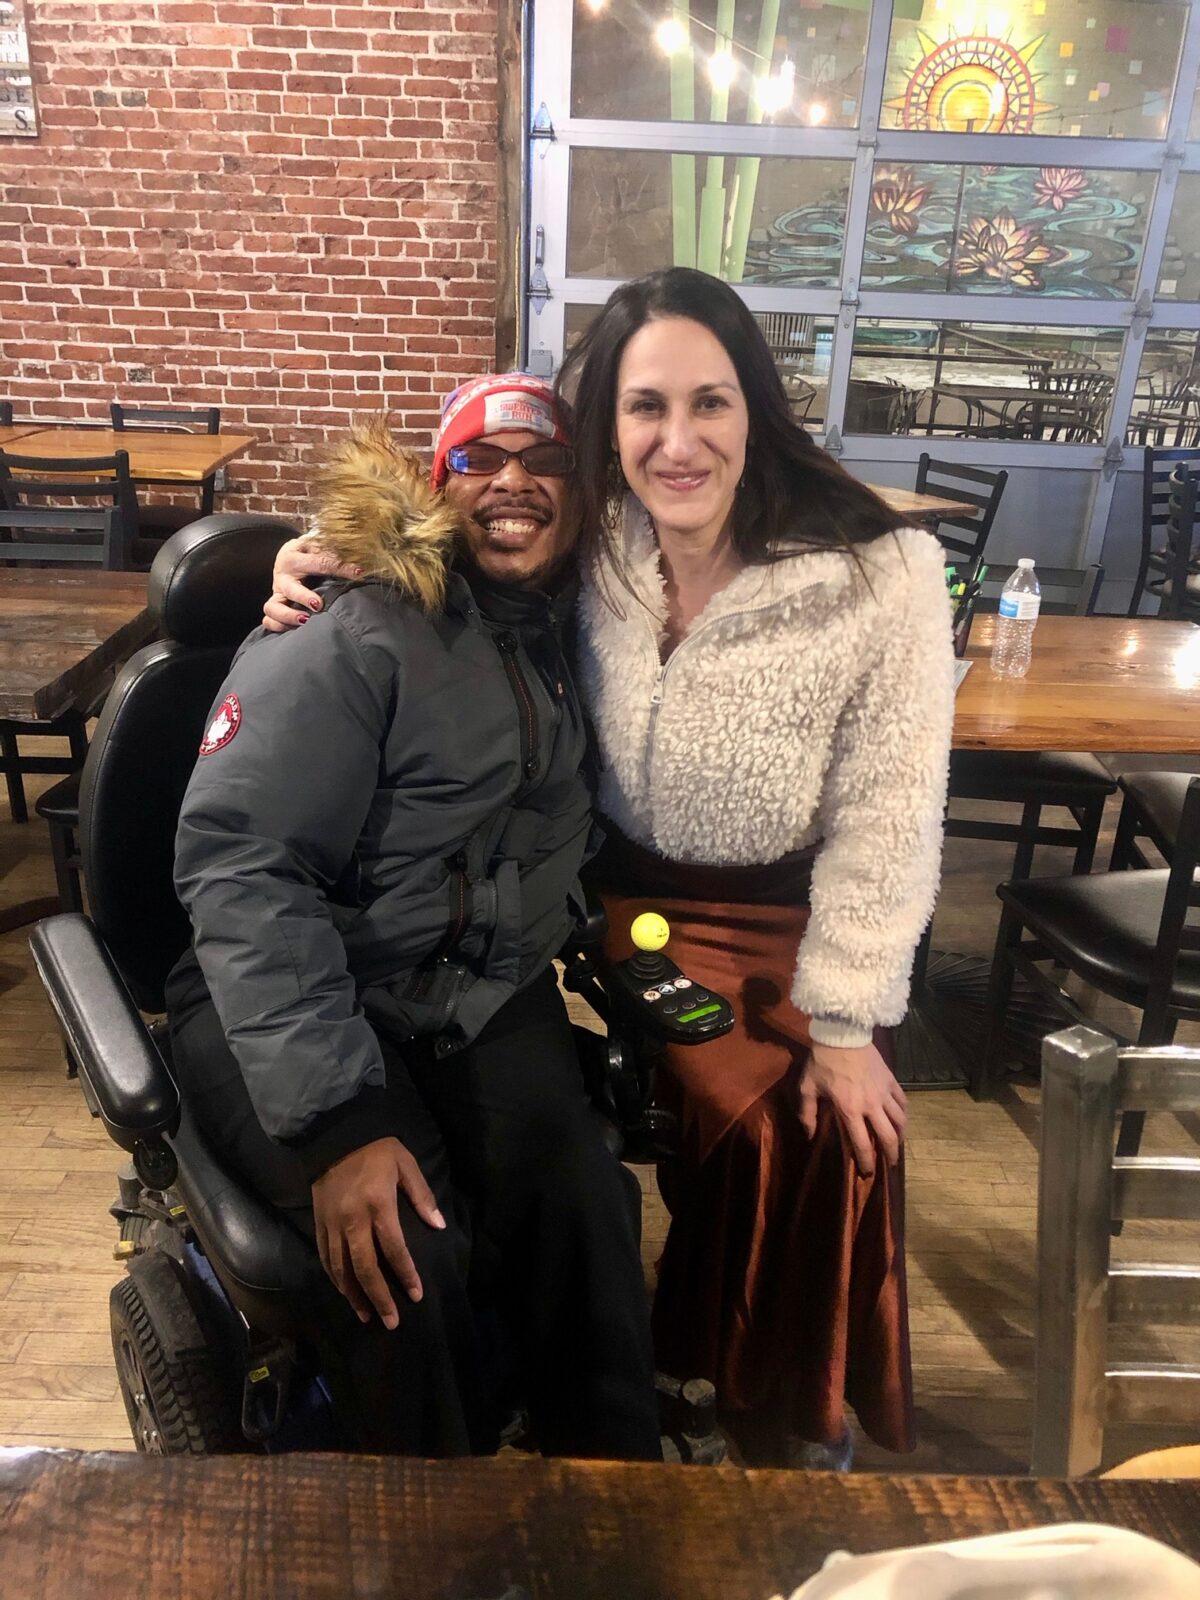 Anthony Scott (L), beertender, with volunteer Kristin Darga dressed up for The Bachelor premiere watch party in Englewood, Colorado. (Courtesy of <a href="https://www.brew-ability.com/">Brewability Lab</a>)